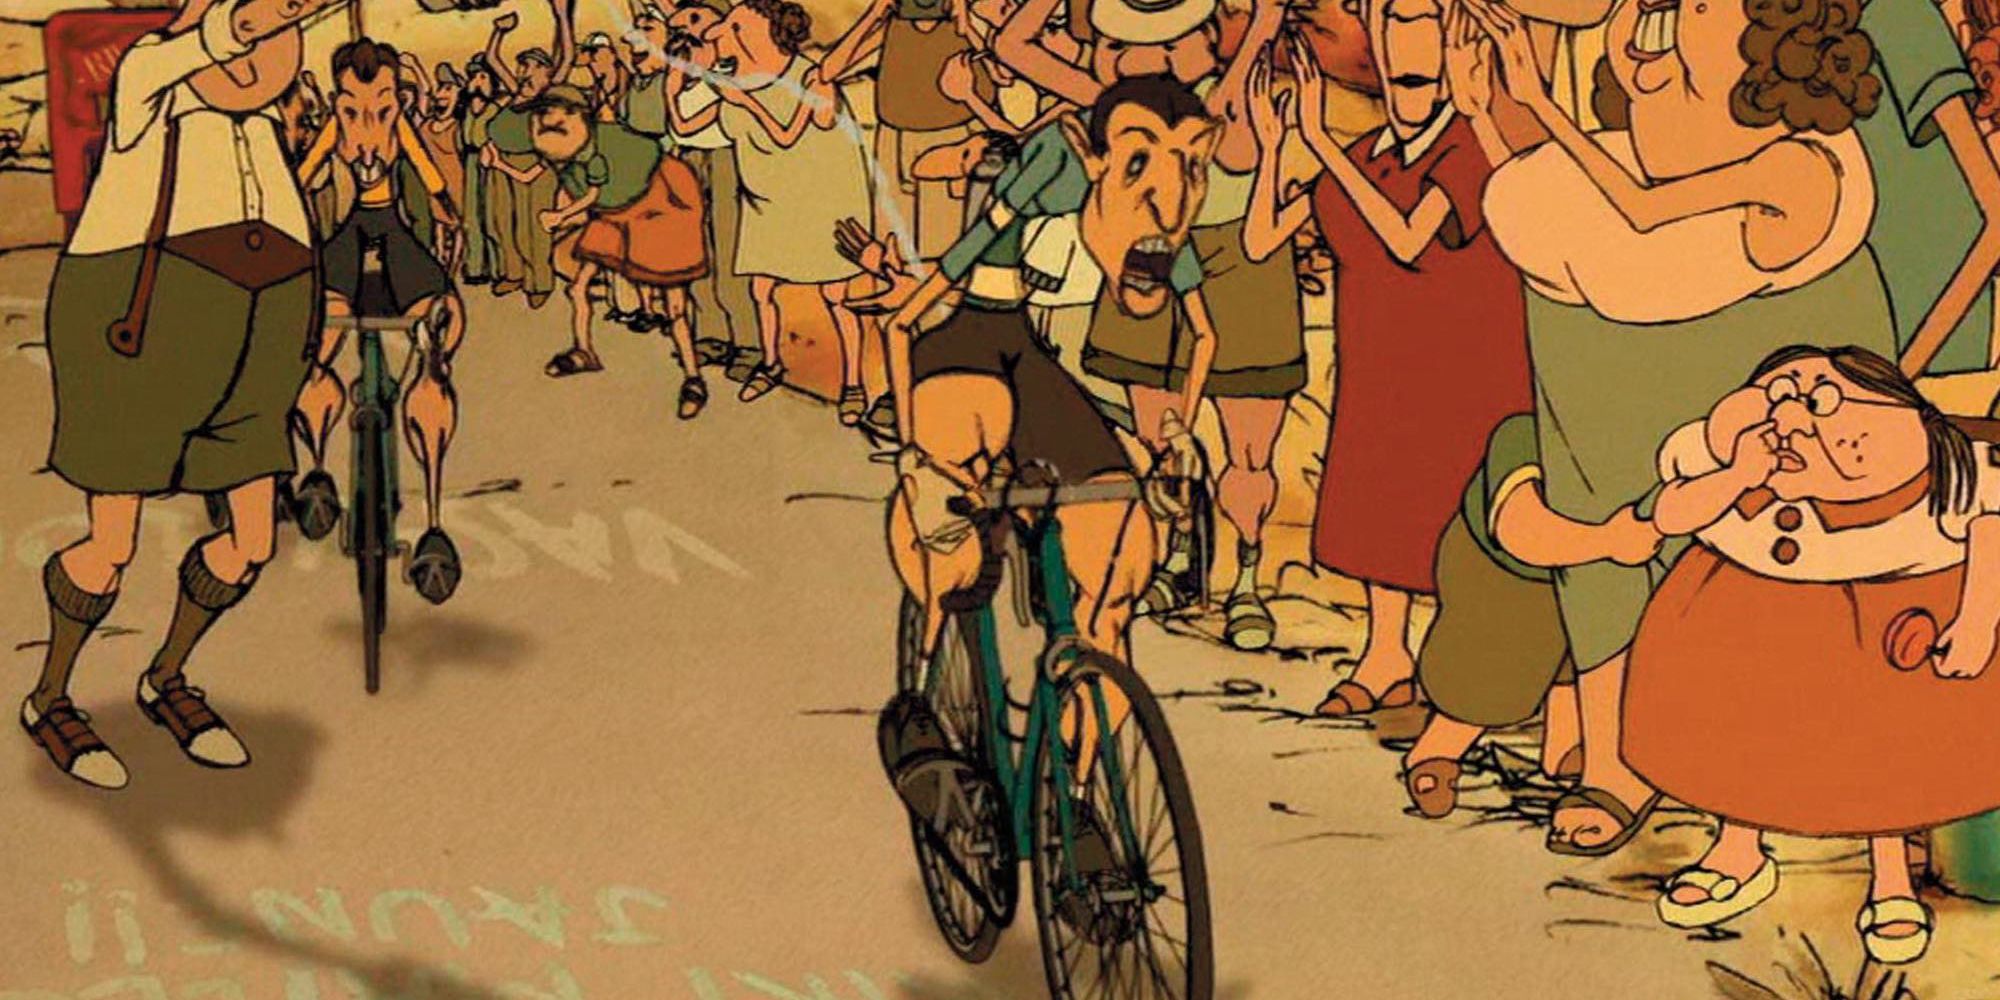 A man riding a bike in a marathon as a crowd of people watch in The Triplets of Belleville